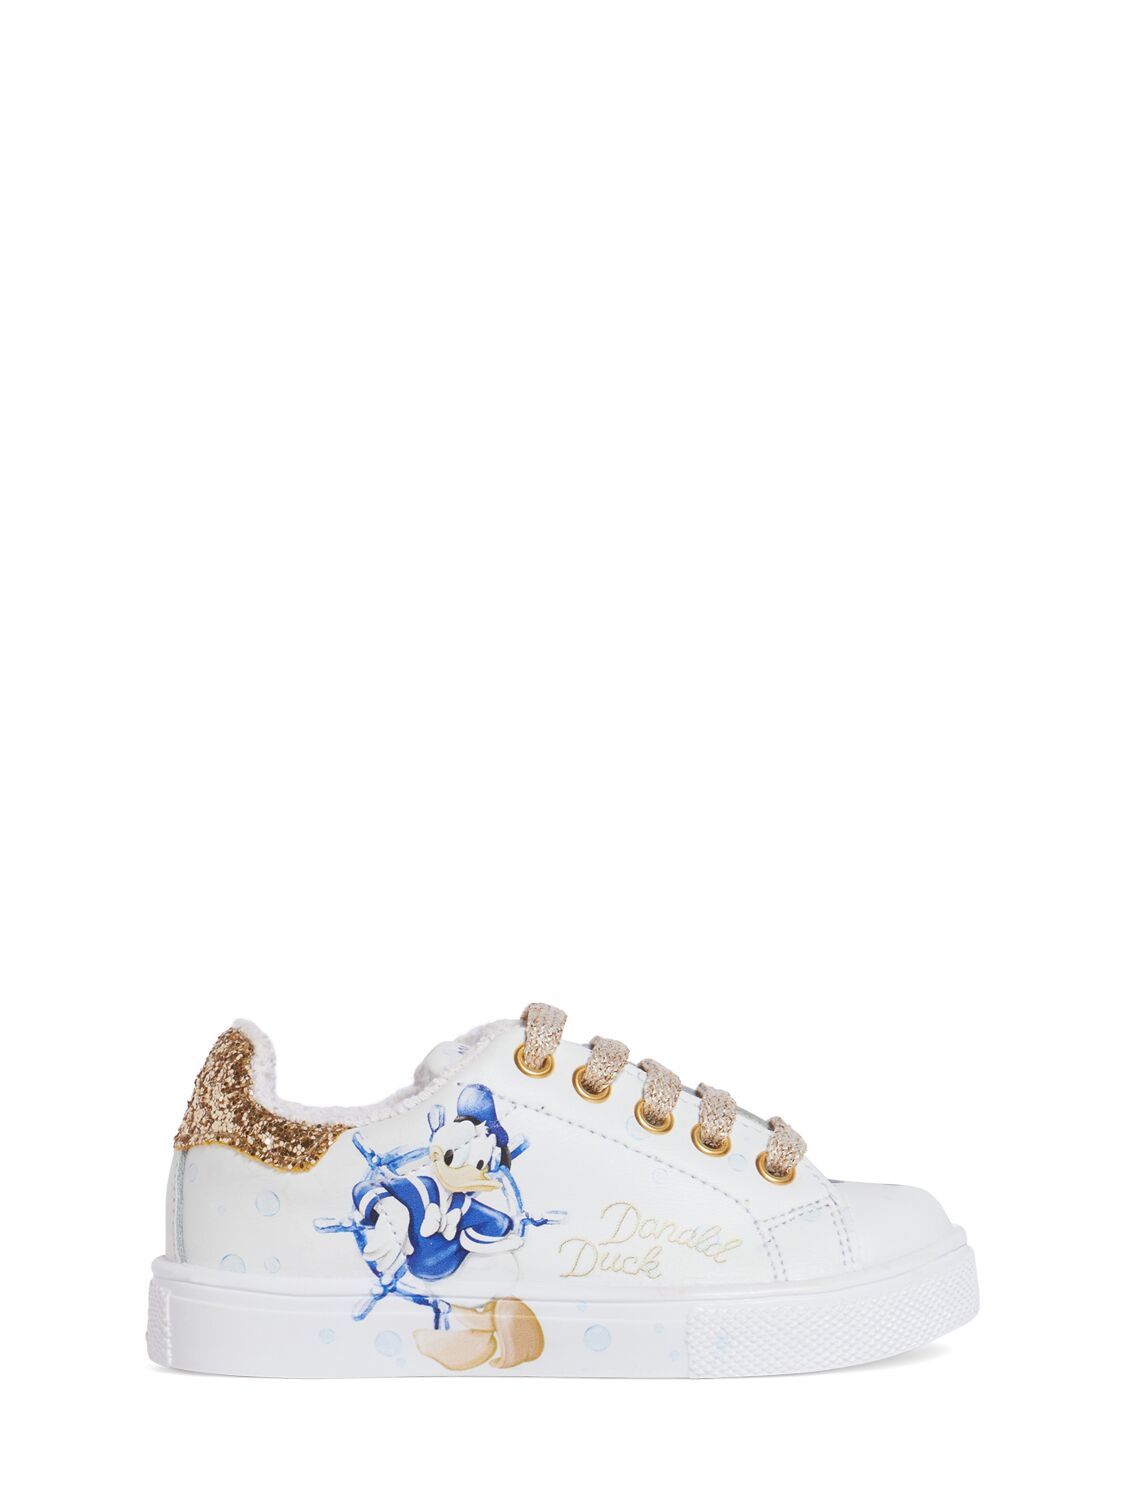 Image of Paperino Printed Leather Sneakers